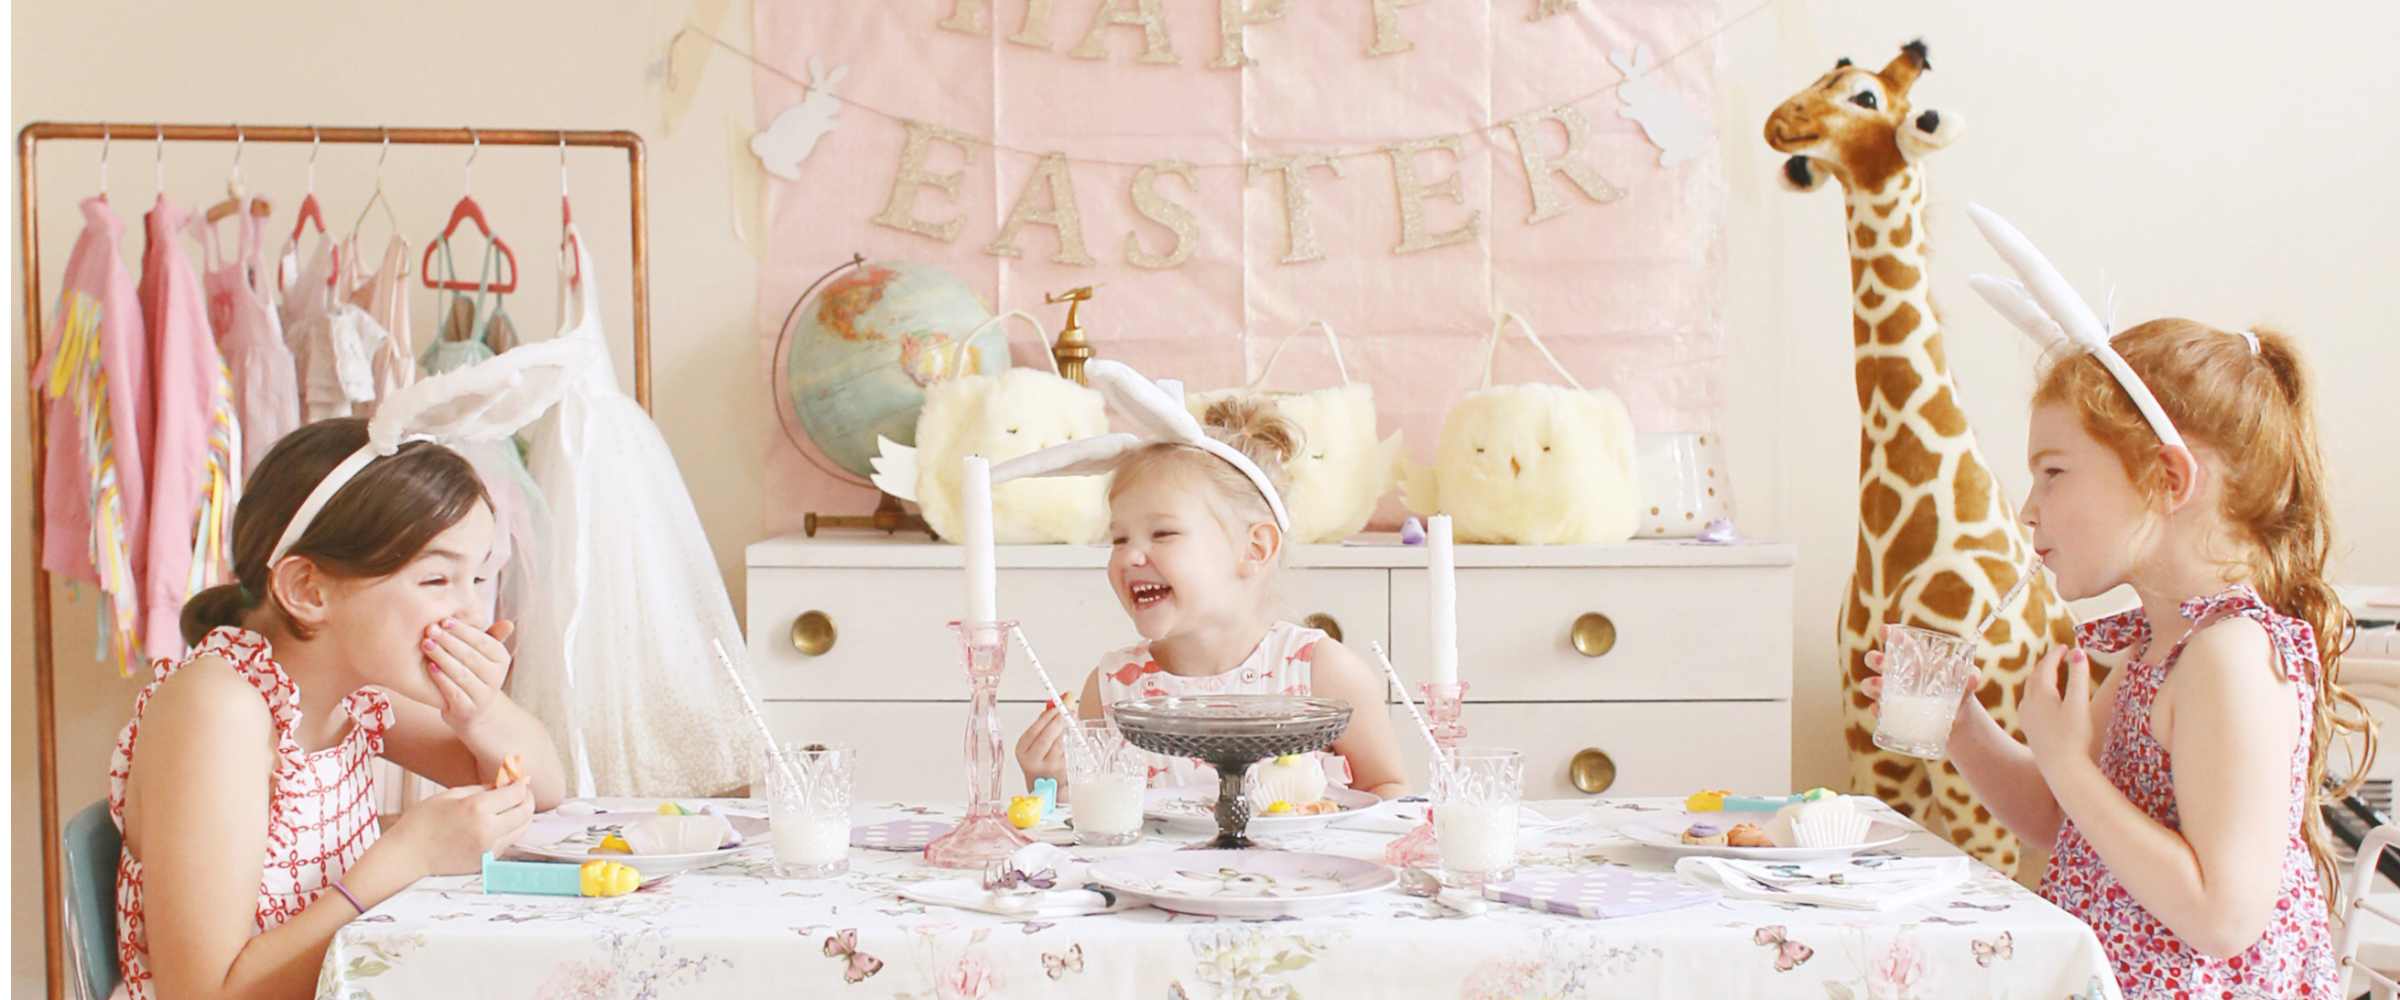 Easter Party Inspiration with Pottery Barn Kids